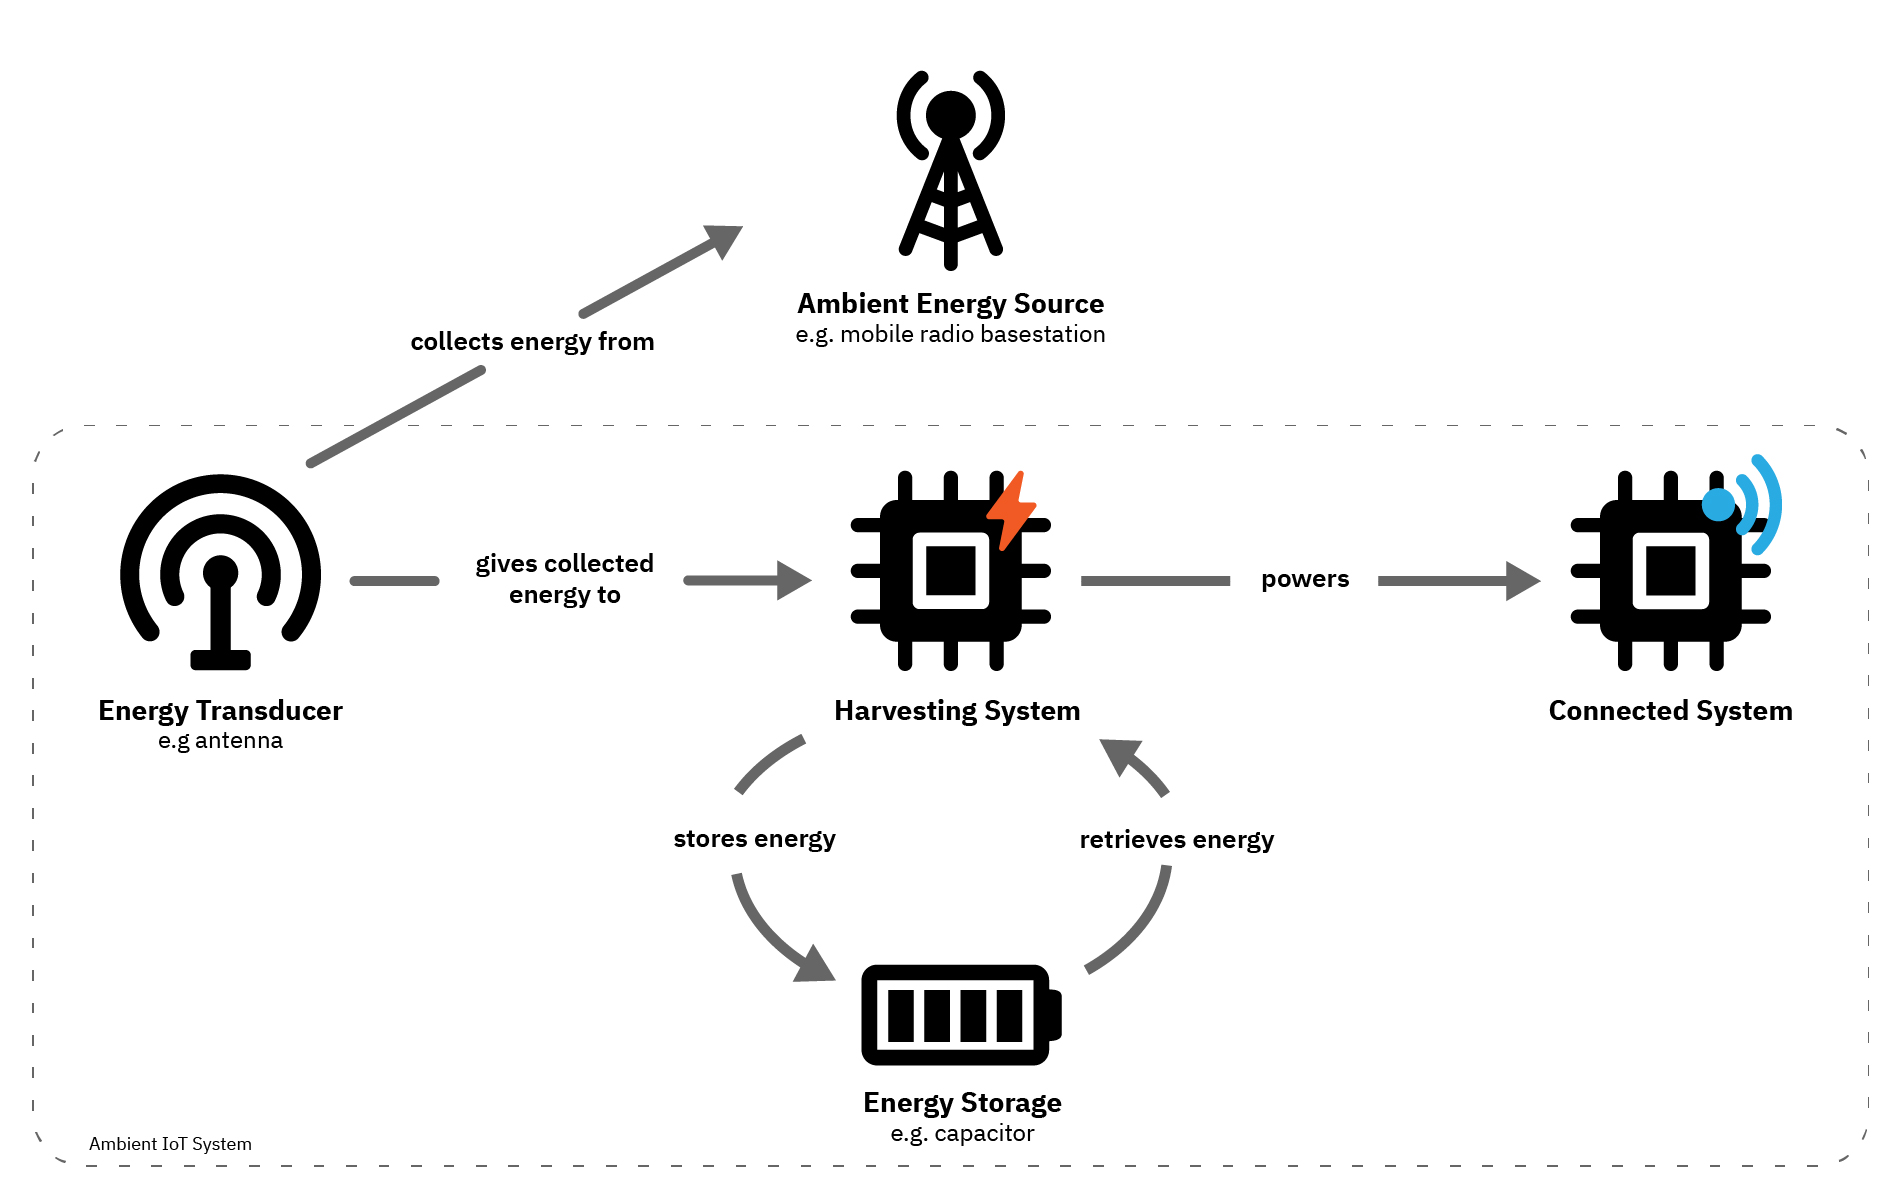 Overview of the different parts of an IoT System using ambient power, with the example use case of radio frequency harvesting